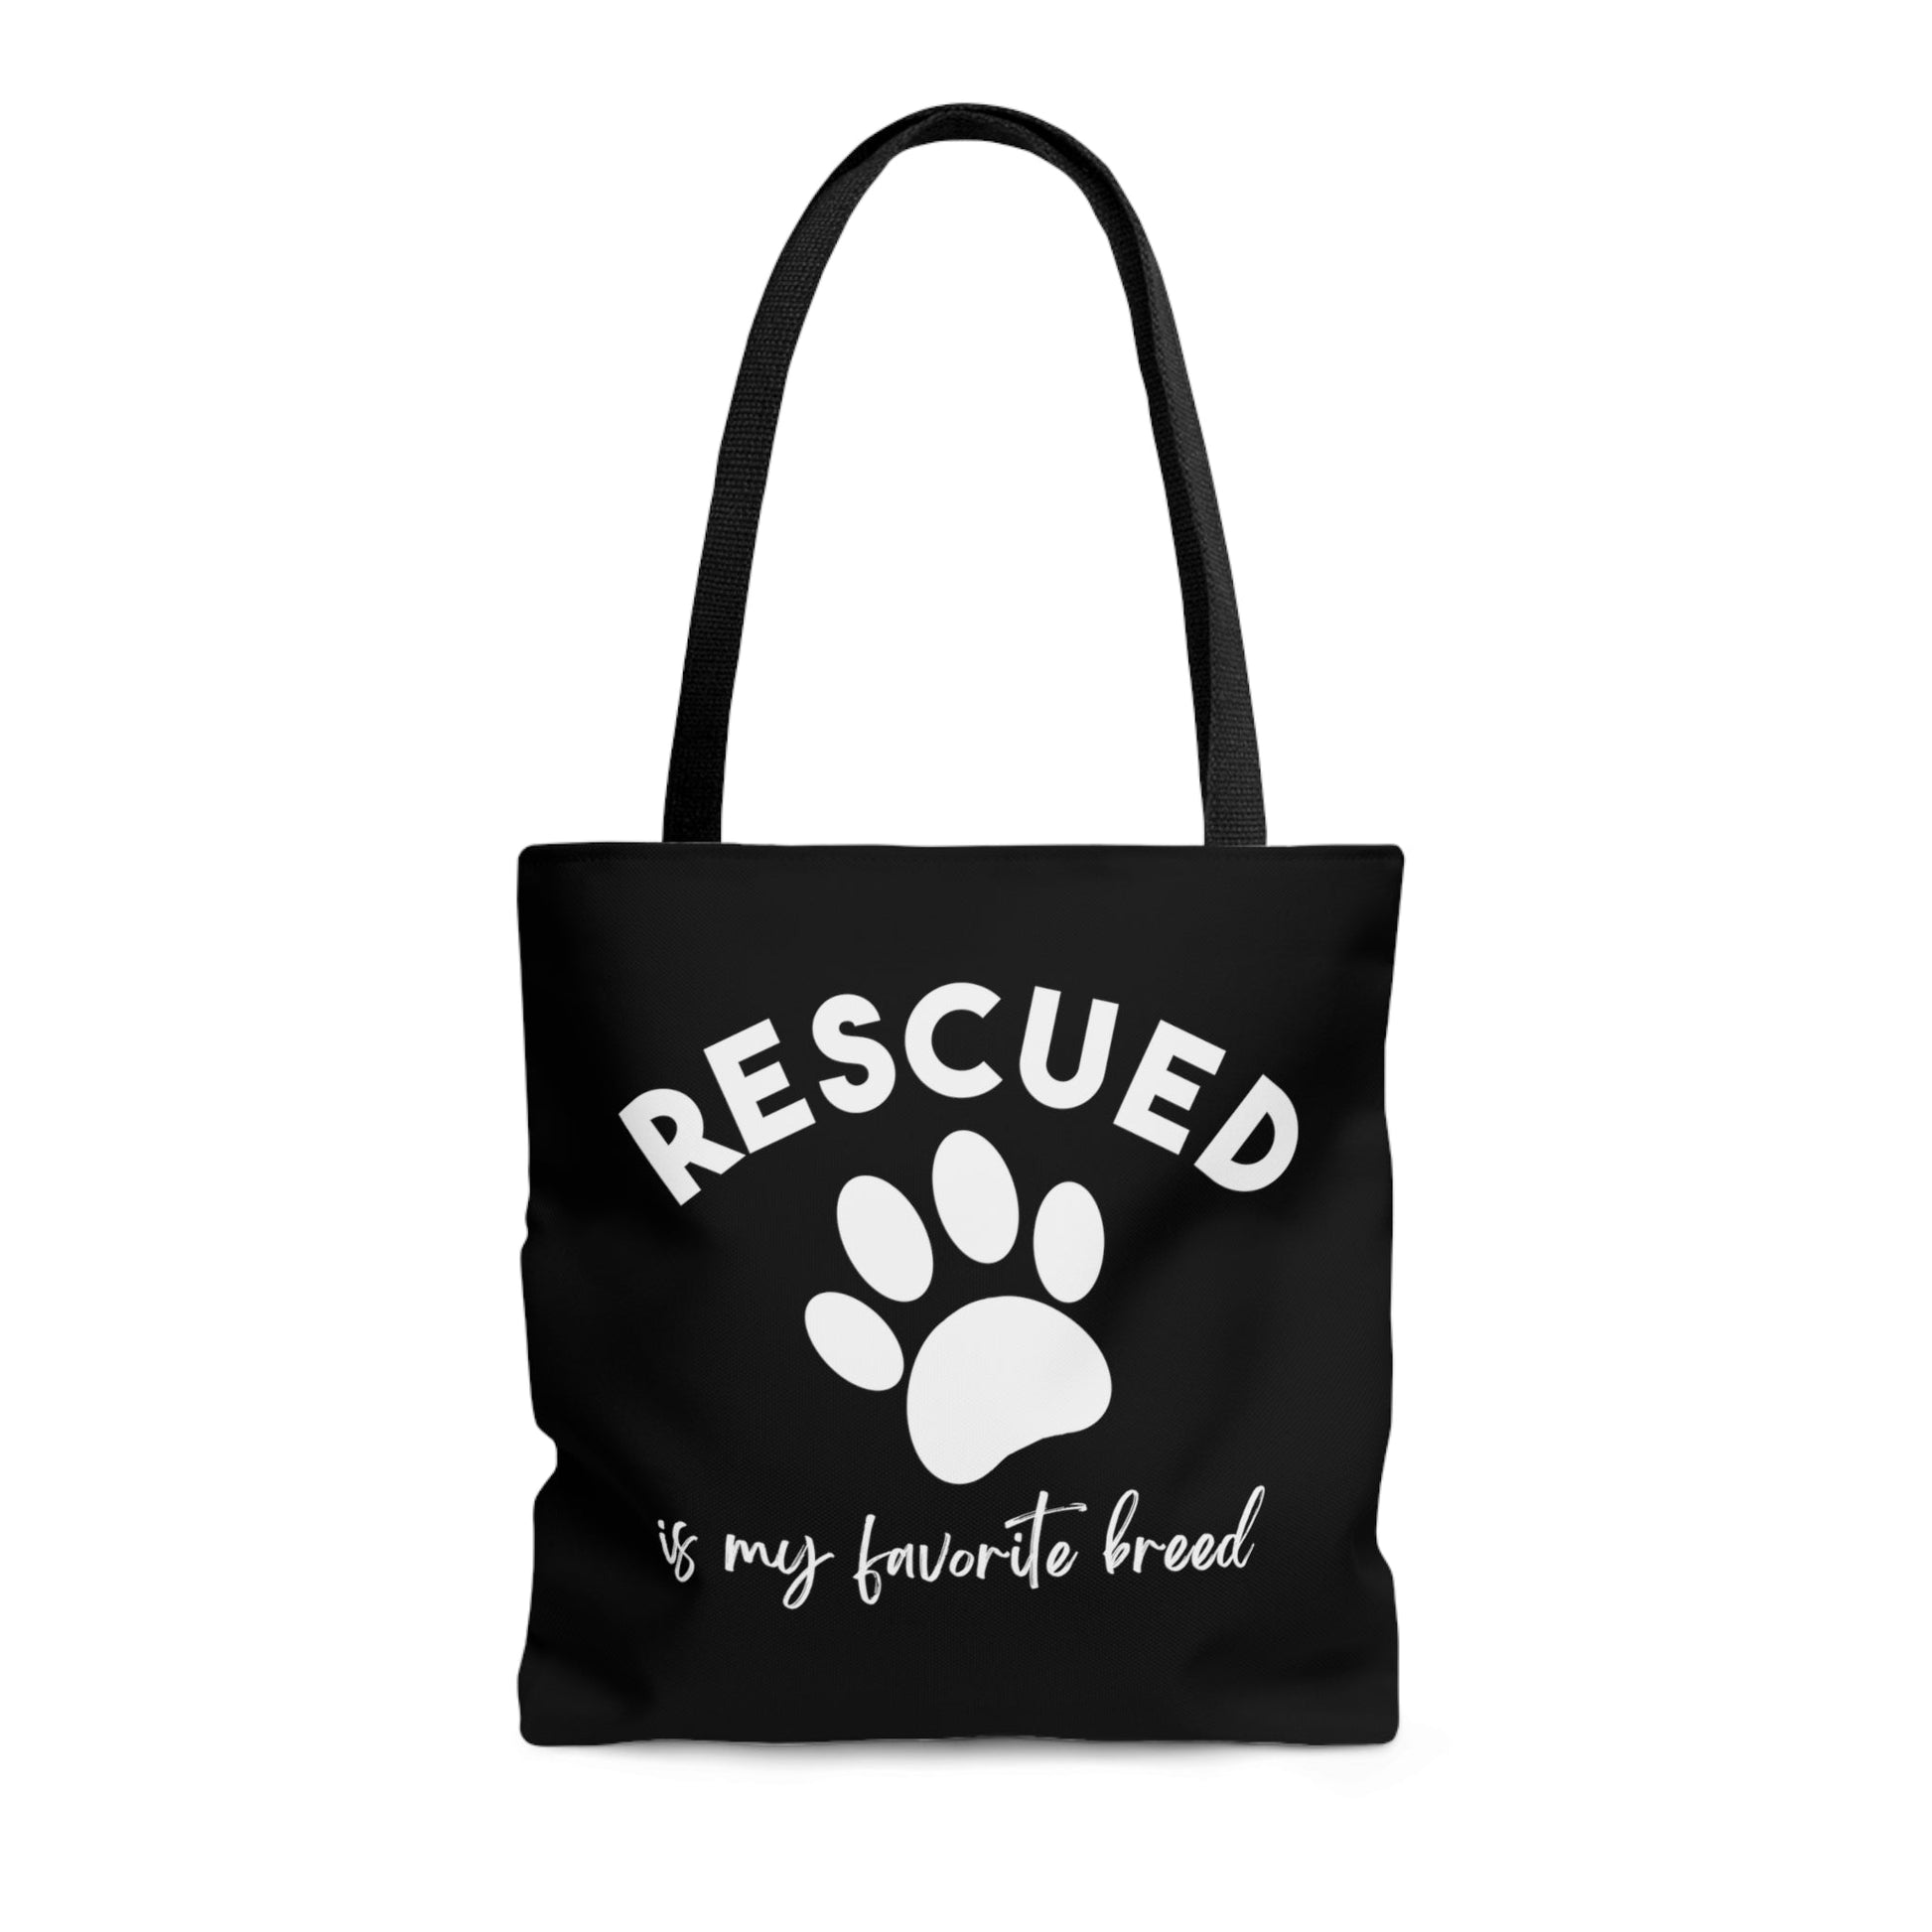 Rescued Is My Favorite Breed Paw | Tote Bag - Detezi Designs-20285097509871169883